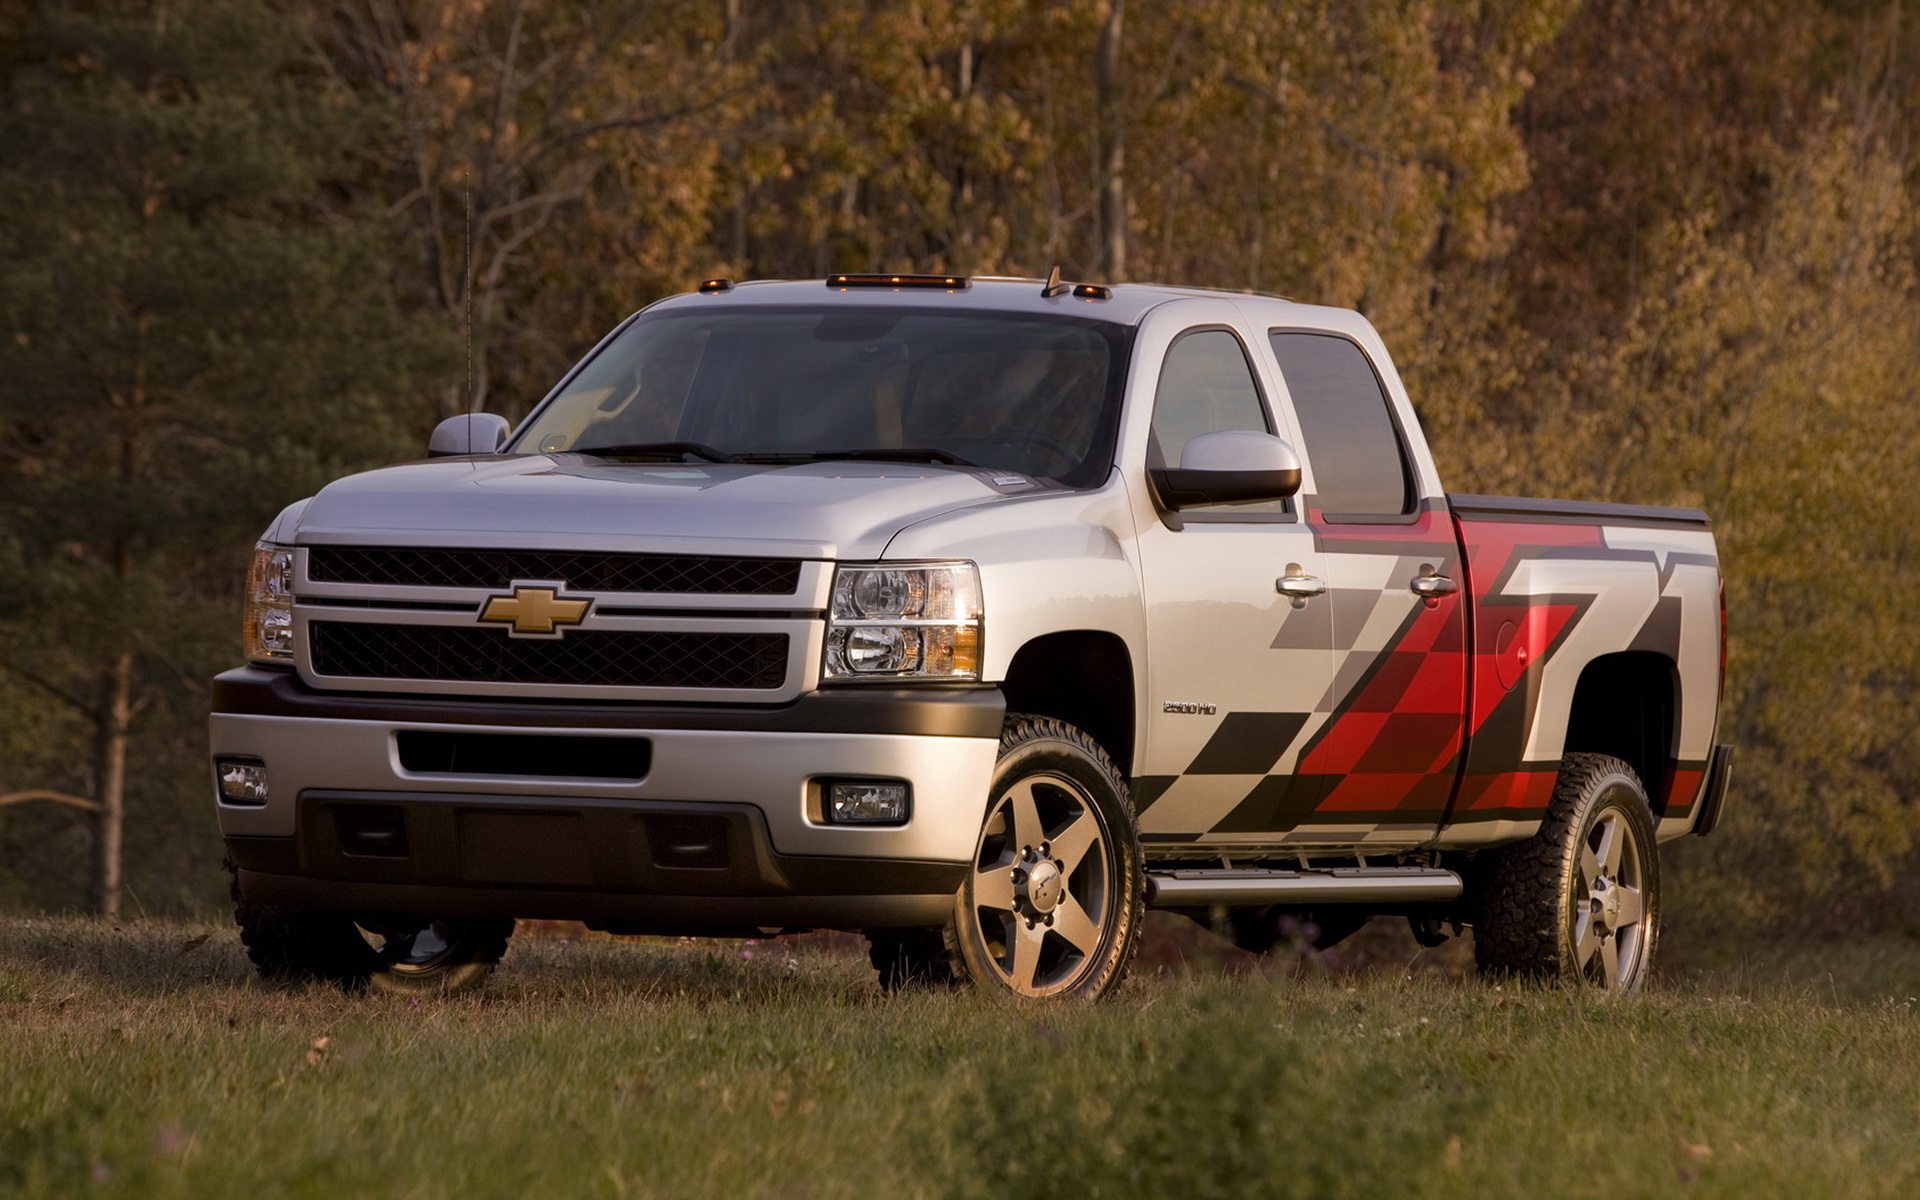 Chevrolet Silverado 2500HD Z71 wallpapers and images - wallpapers